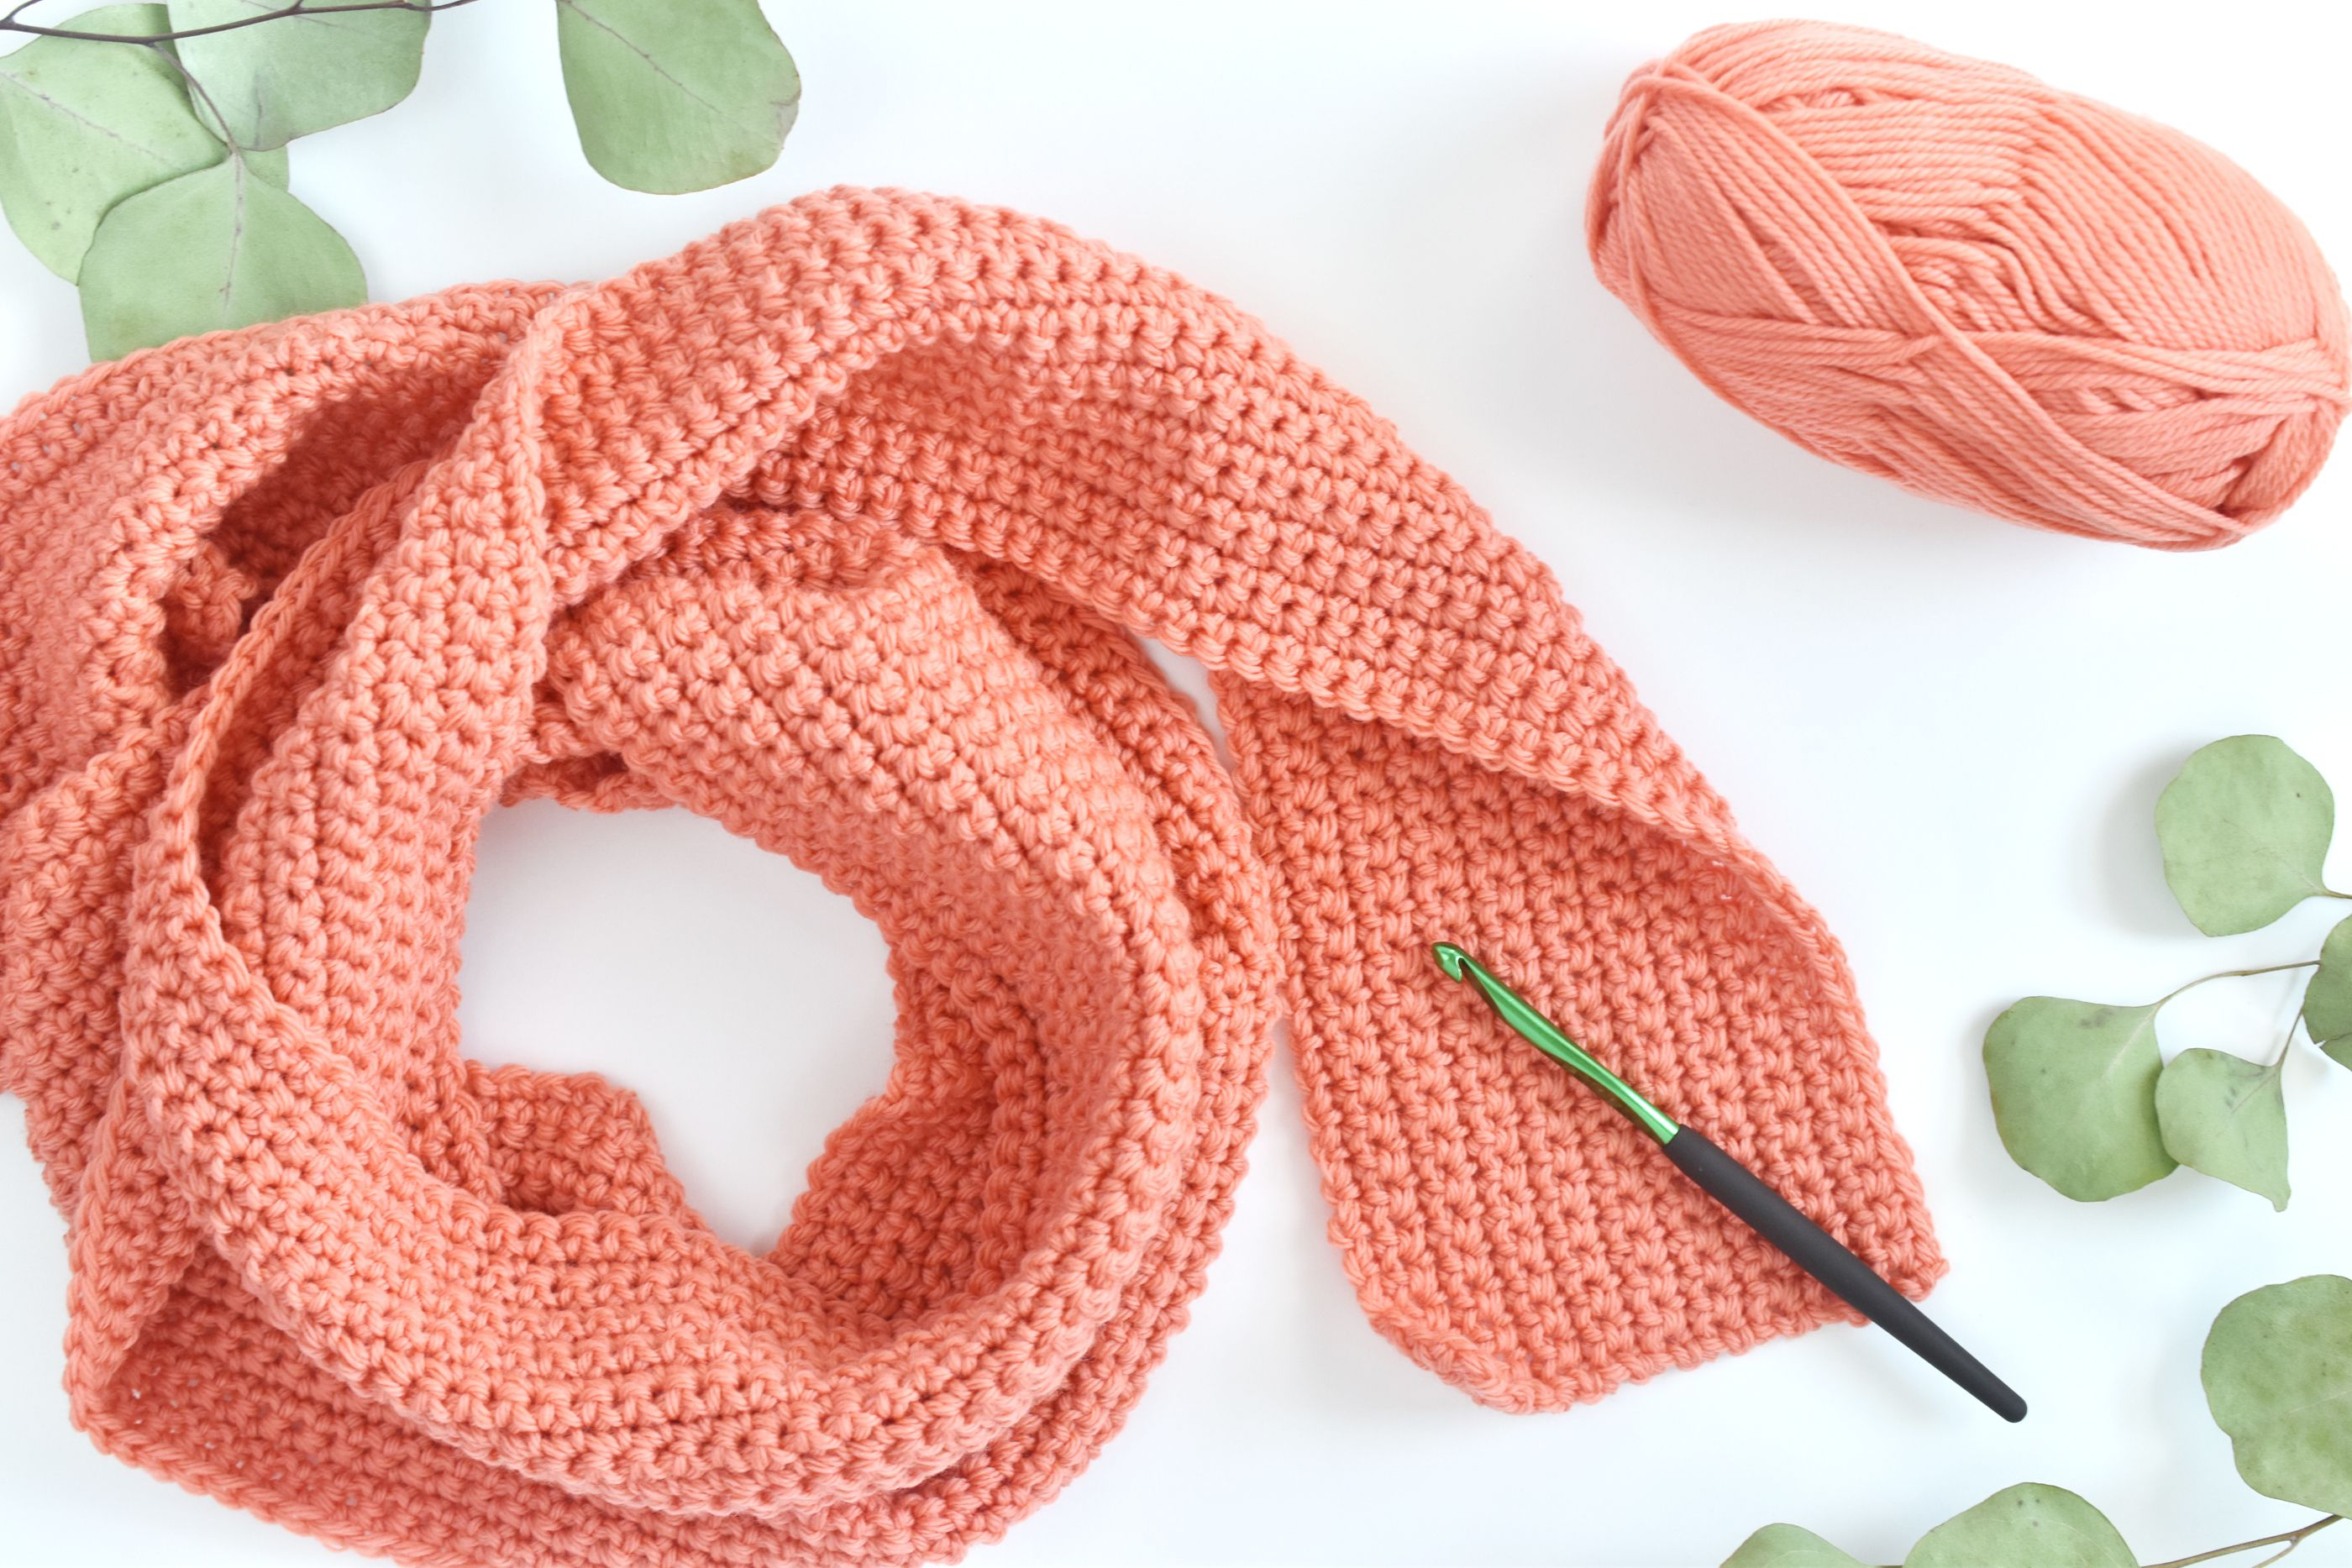 4Mm Crochet Hook Patterns How To Crochet A Scarf For Beginners